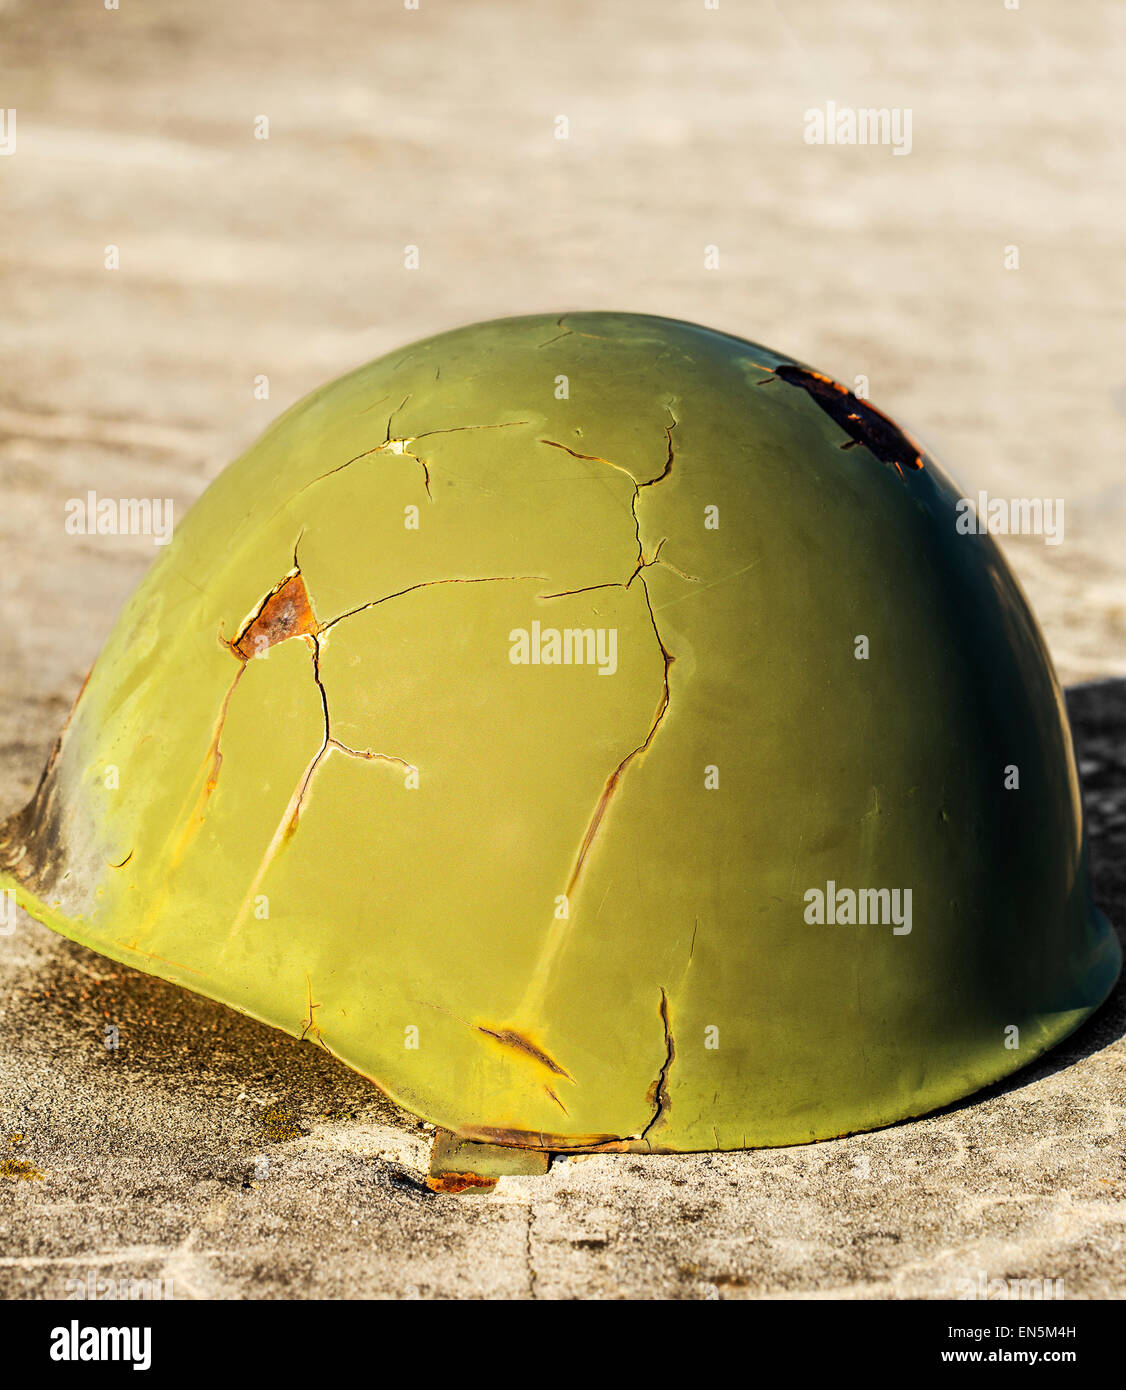 Green helmet used in war, placed on a concrete. Stock Photo